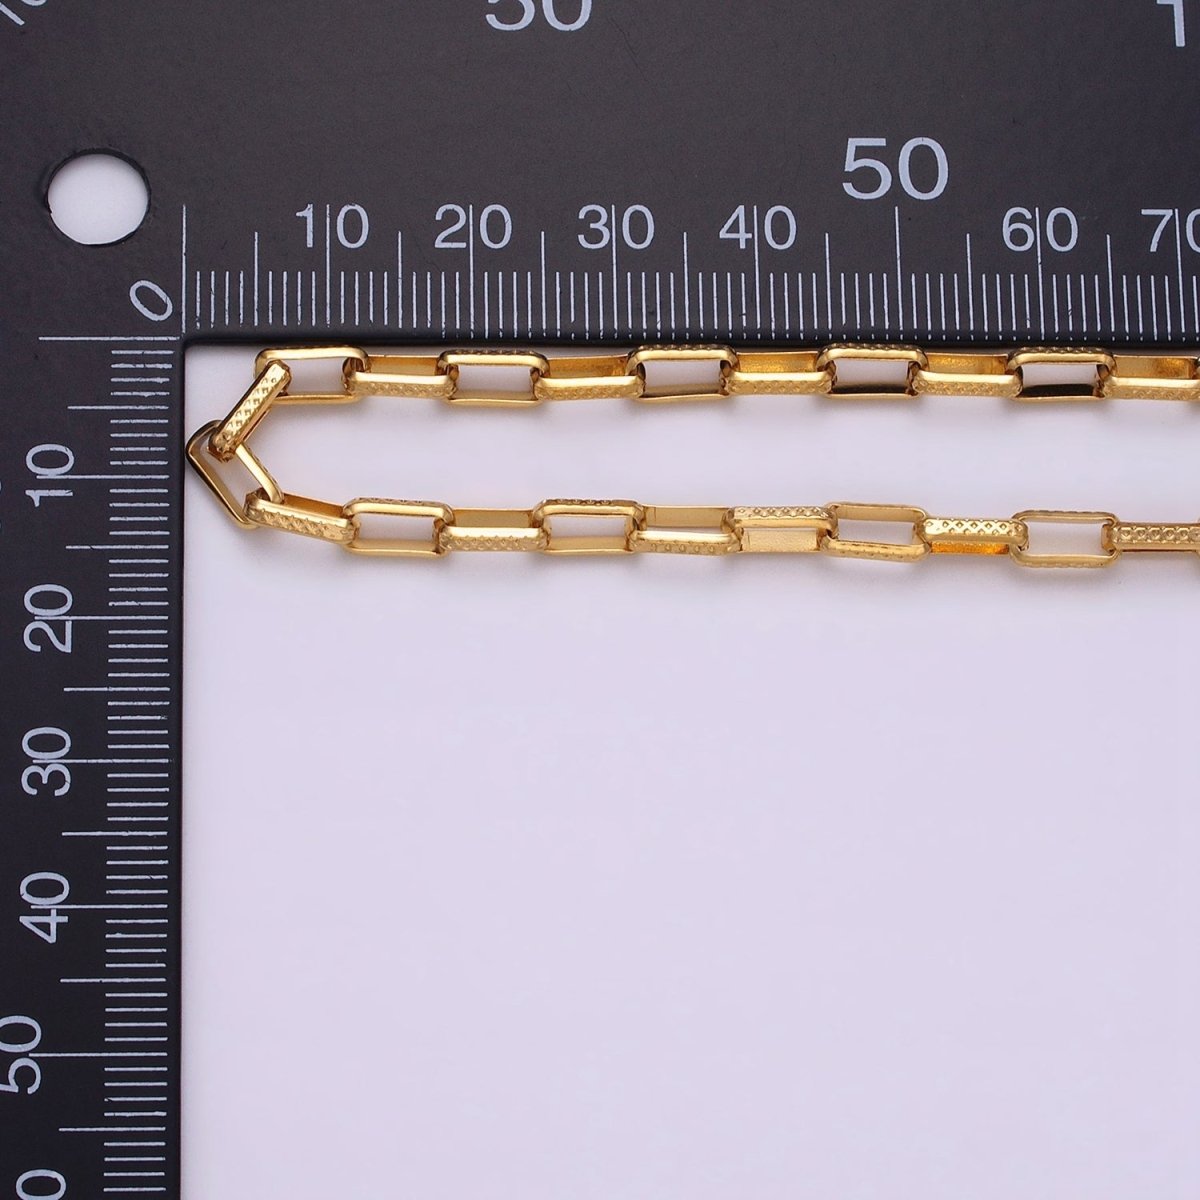 24K Gold Filled Textured Elongated PaperClip Chain Box Cable Chain by yard Wholesale Chain for Jewelry making | ROLL-1275 ROLL-1276 Clearance Pricing - DLUXCA